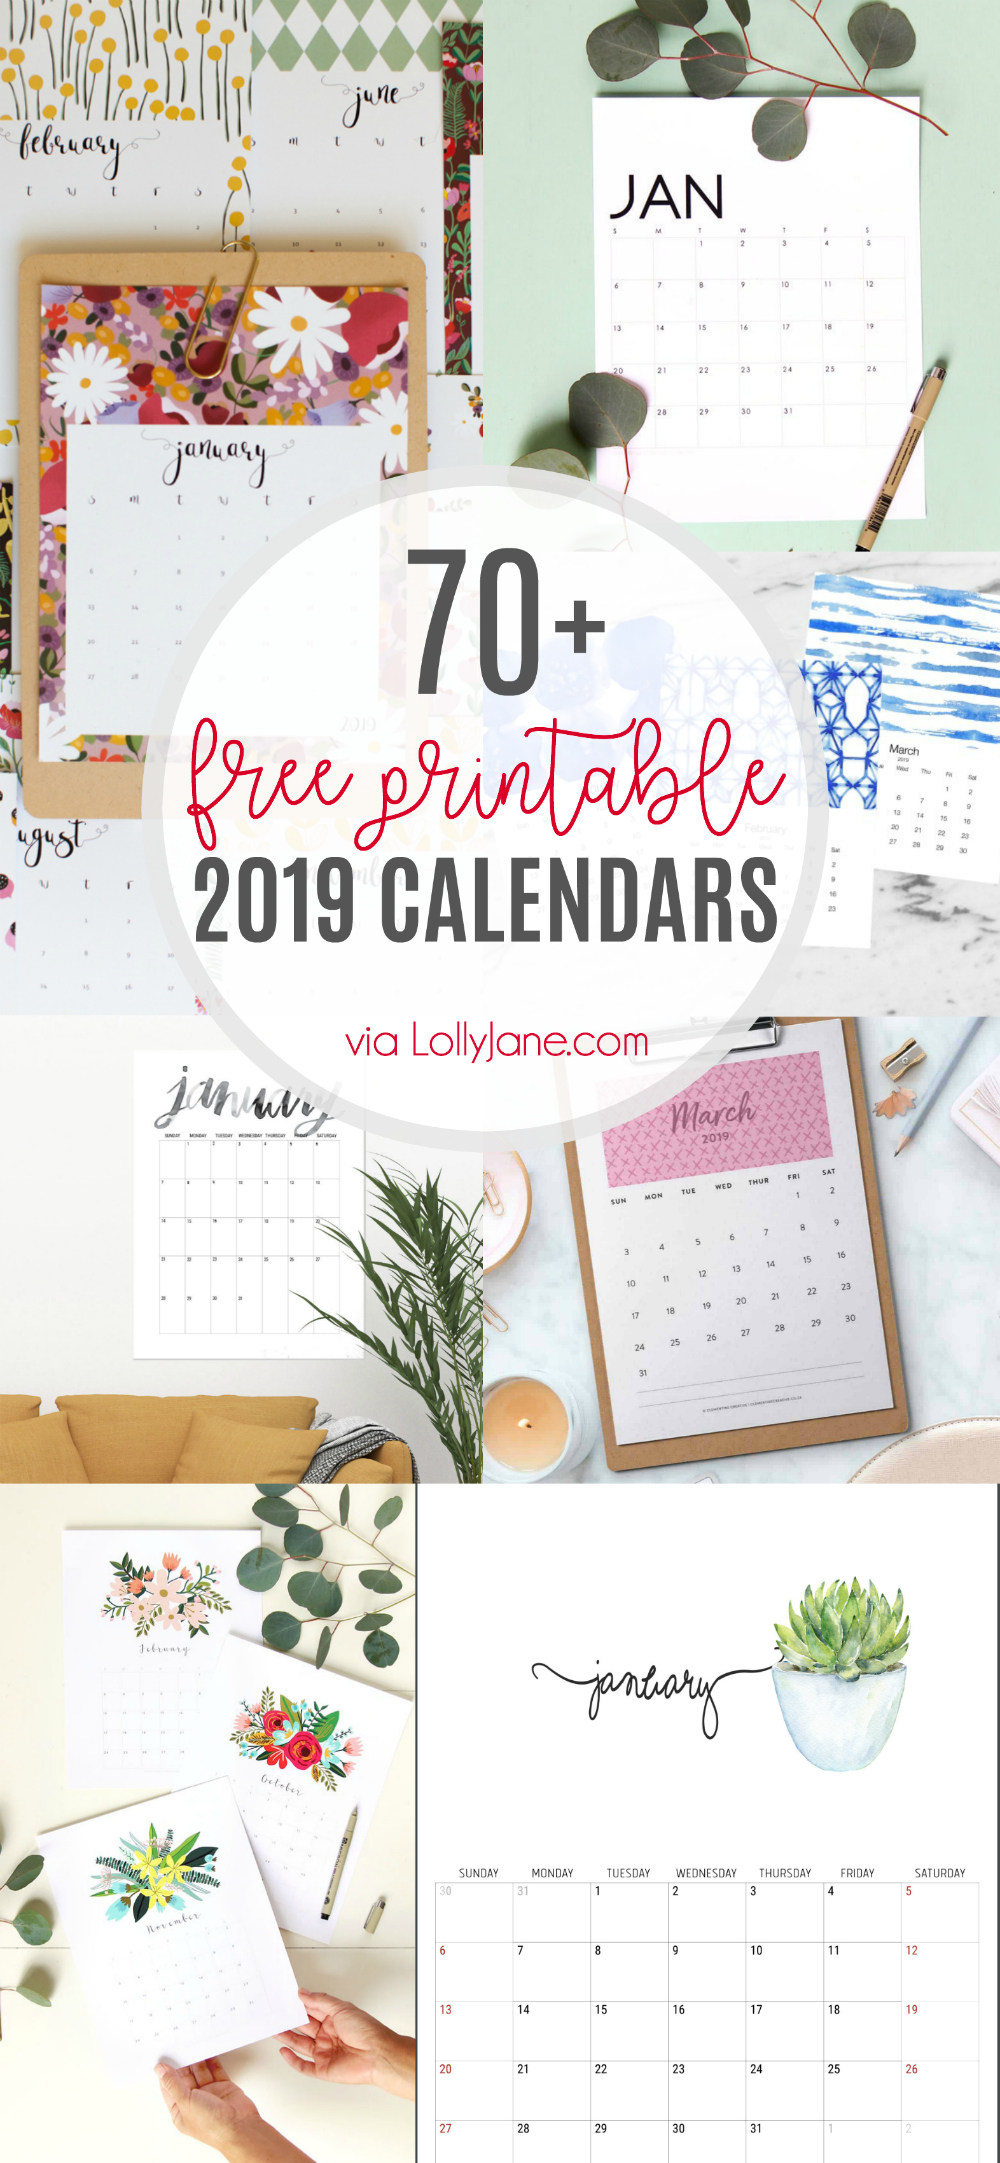 click for the biggest round up of 2019 FREE Calendars ever, over 70 styles!!! From minimalist to colorful, playful and practical, there is one sure to fit your needs-- click through to see this awesome collection of 2019 FREE printable calendars! #2019calendar #freeprintable #calendar #2019